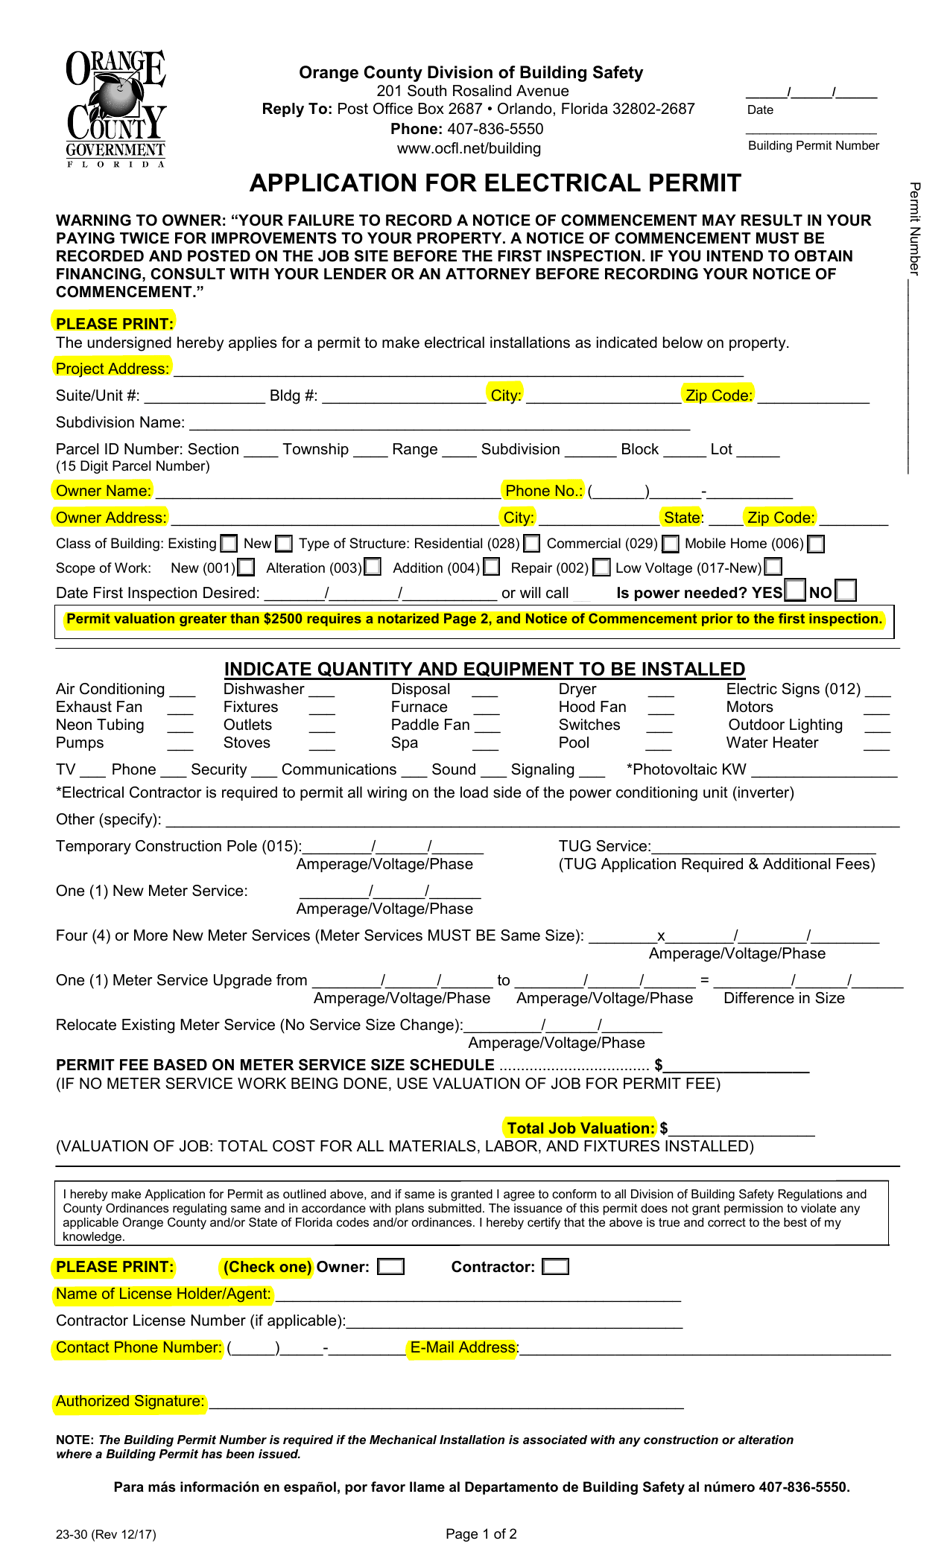 Form 23-30 Application for Electrical Permit - Orange County, Florida, Page 1